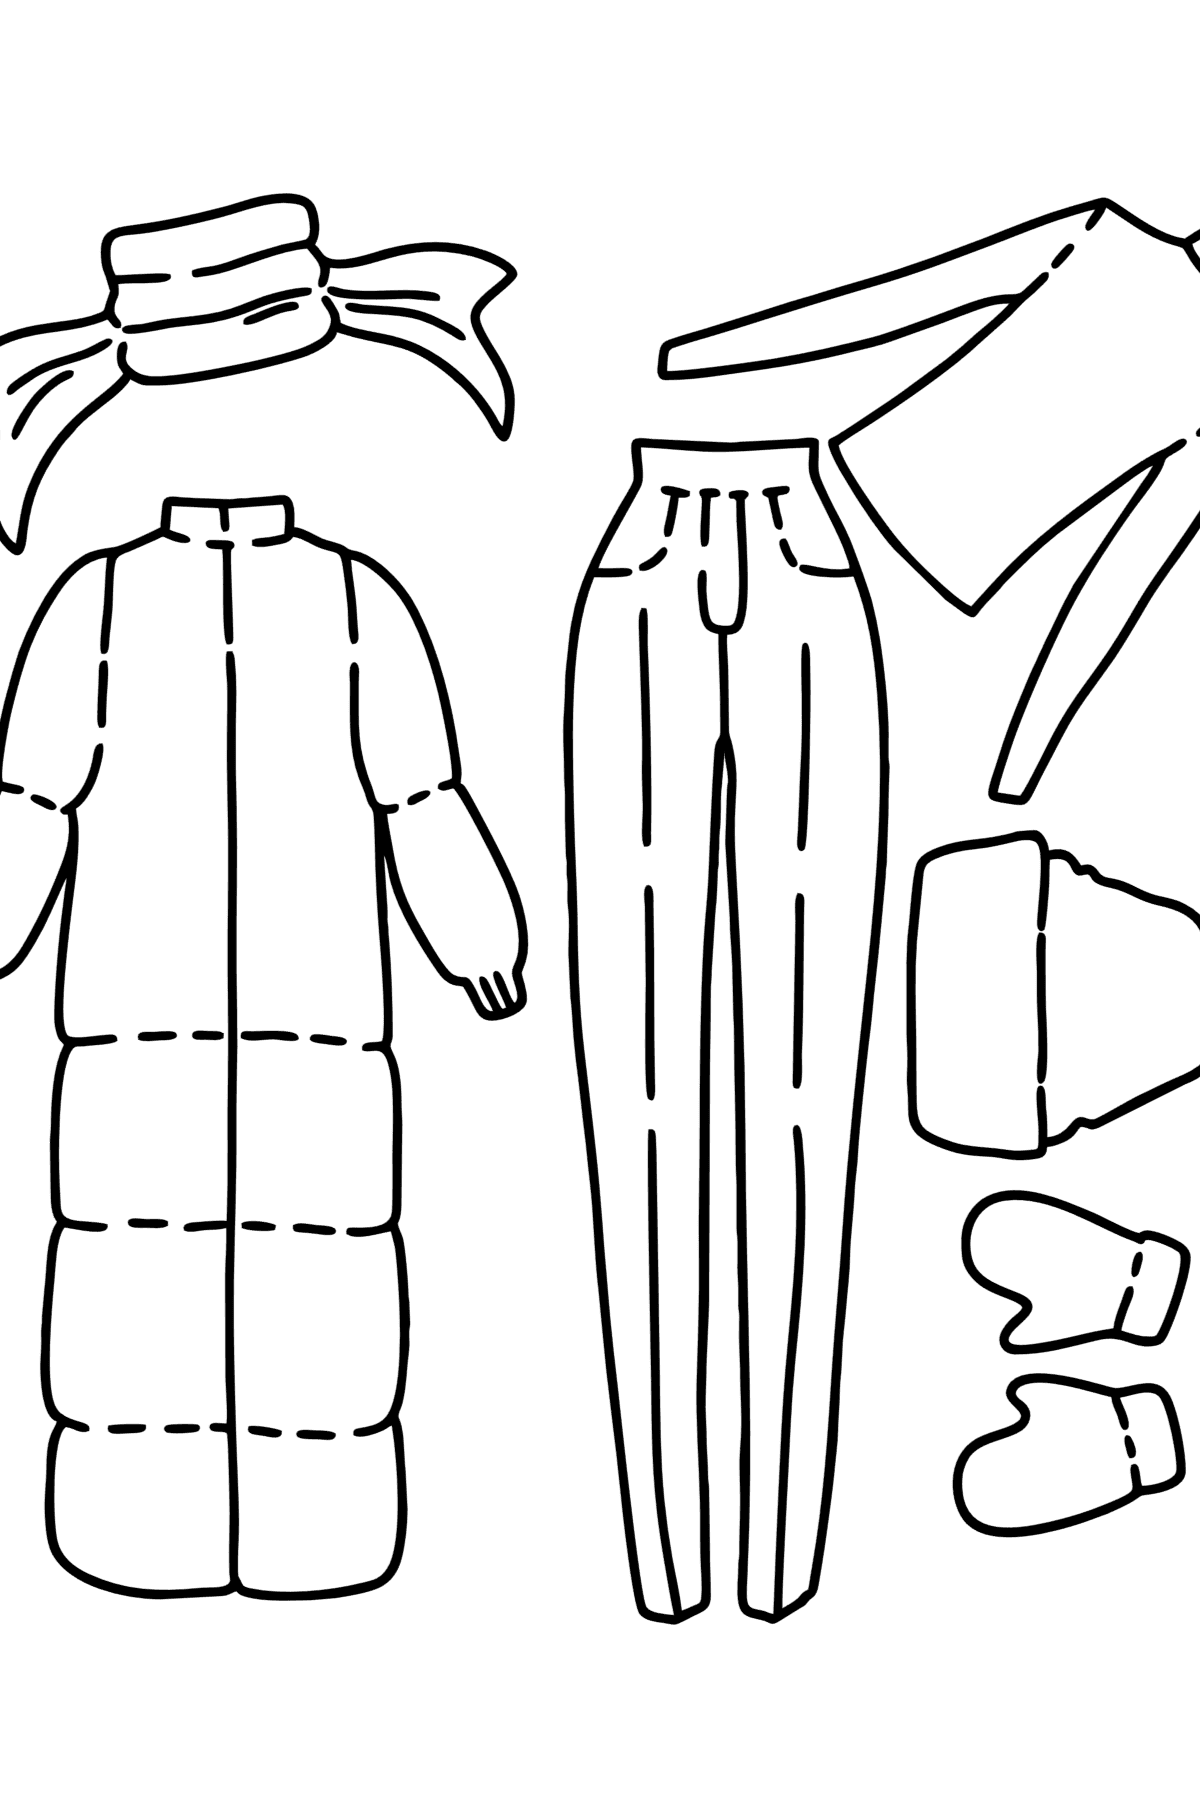 Winter Clothes coloring page - Coloring Pages for Kids